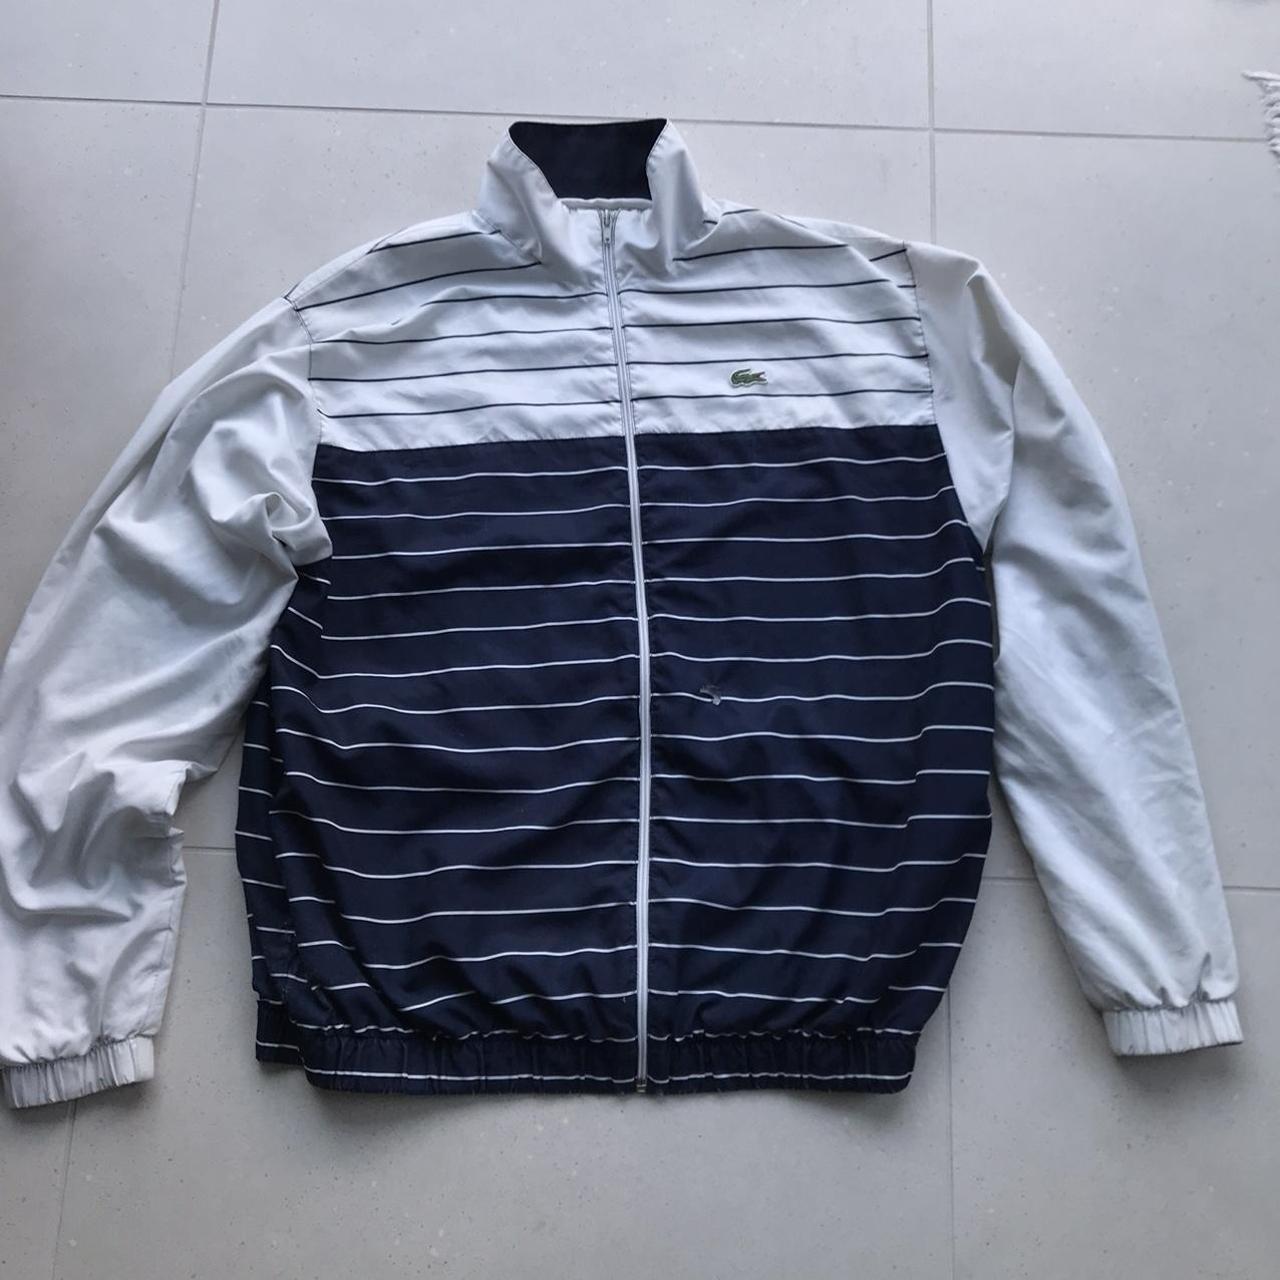 Lacoste Track Jacket (RARE colourway) - navy and... - Depop